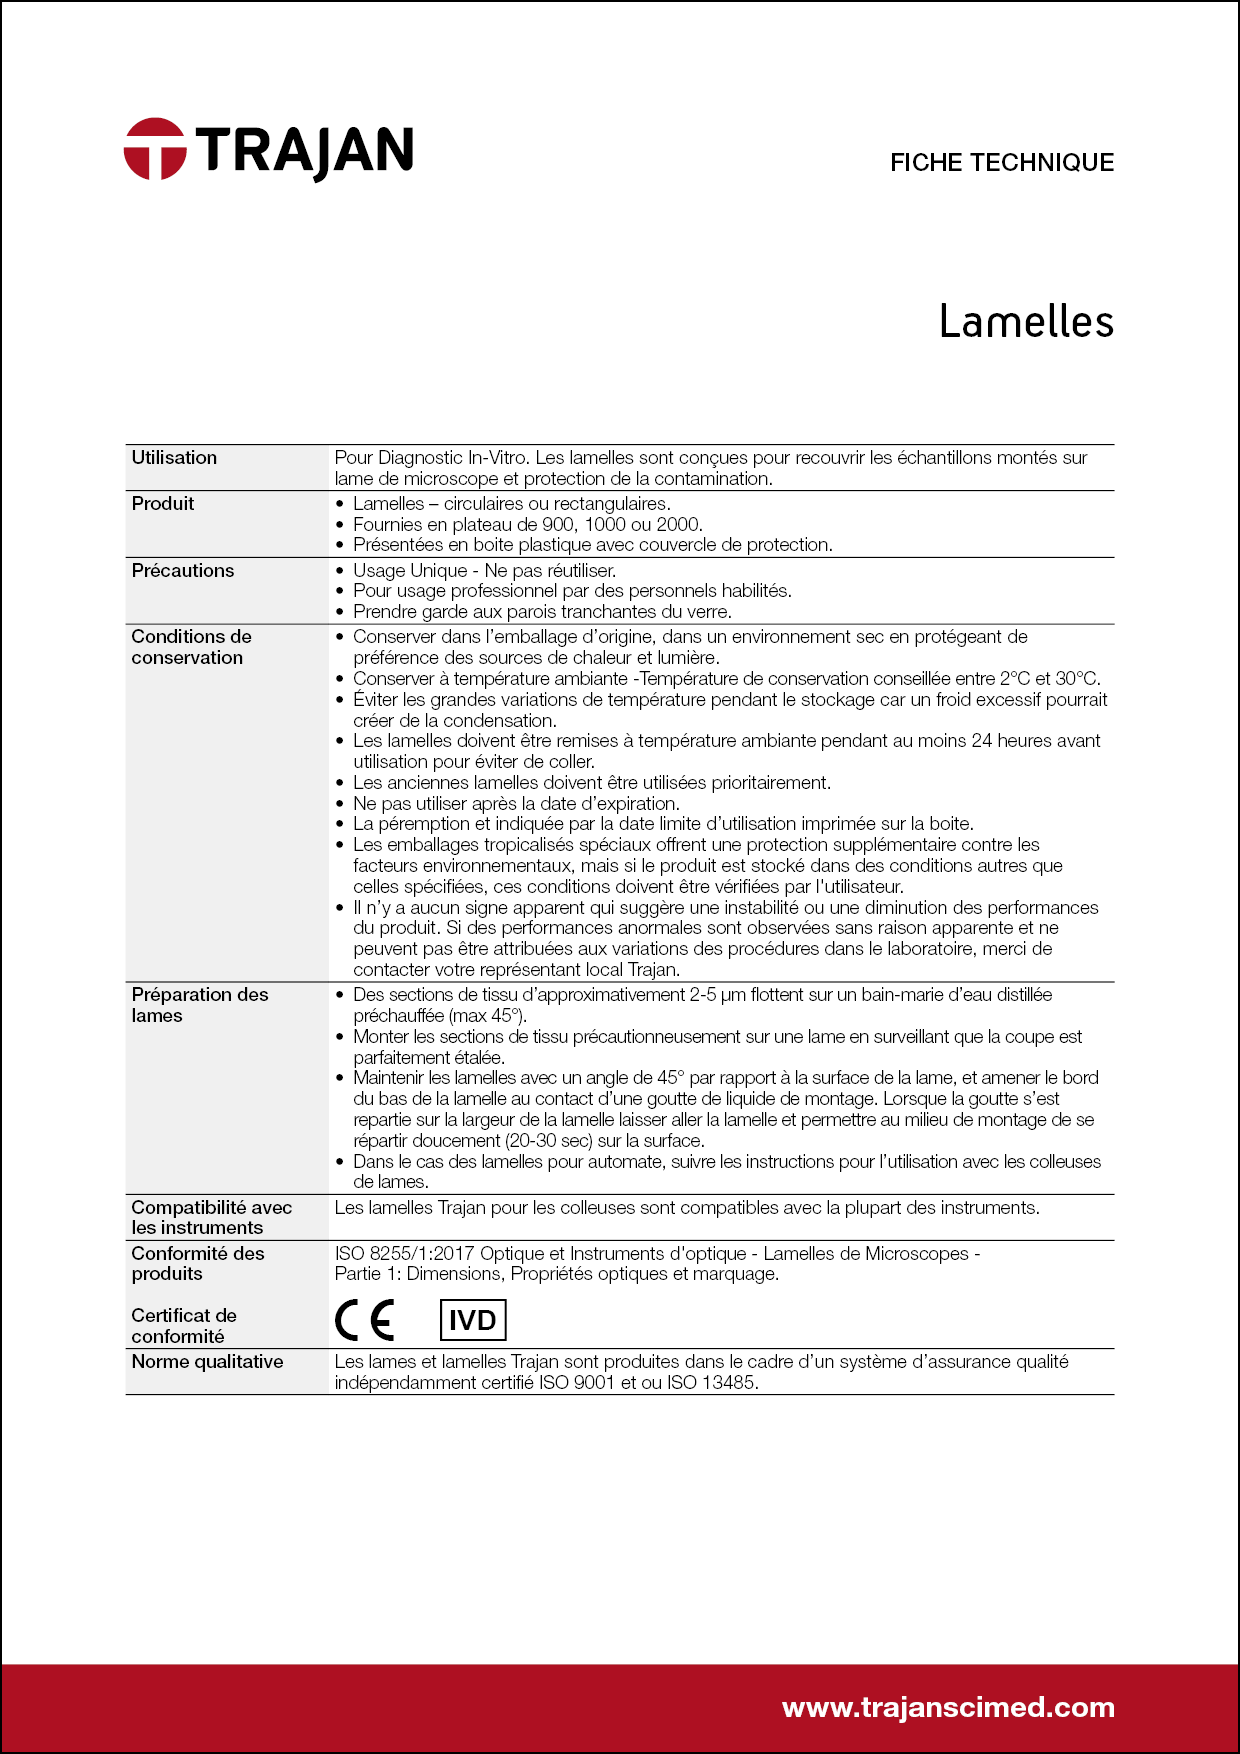 Product Specification Sheet - Trajan coverslips (French)